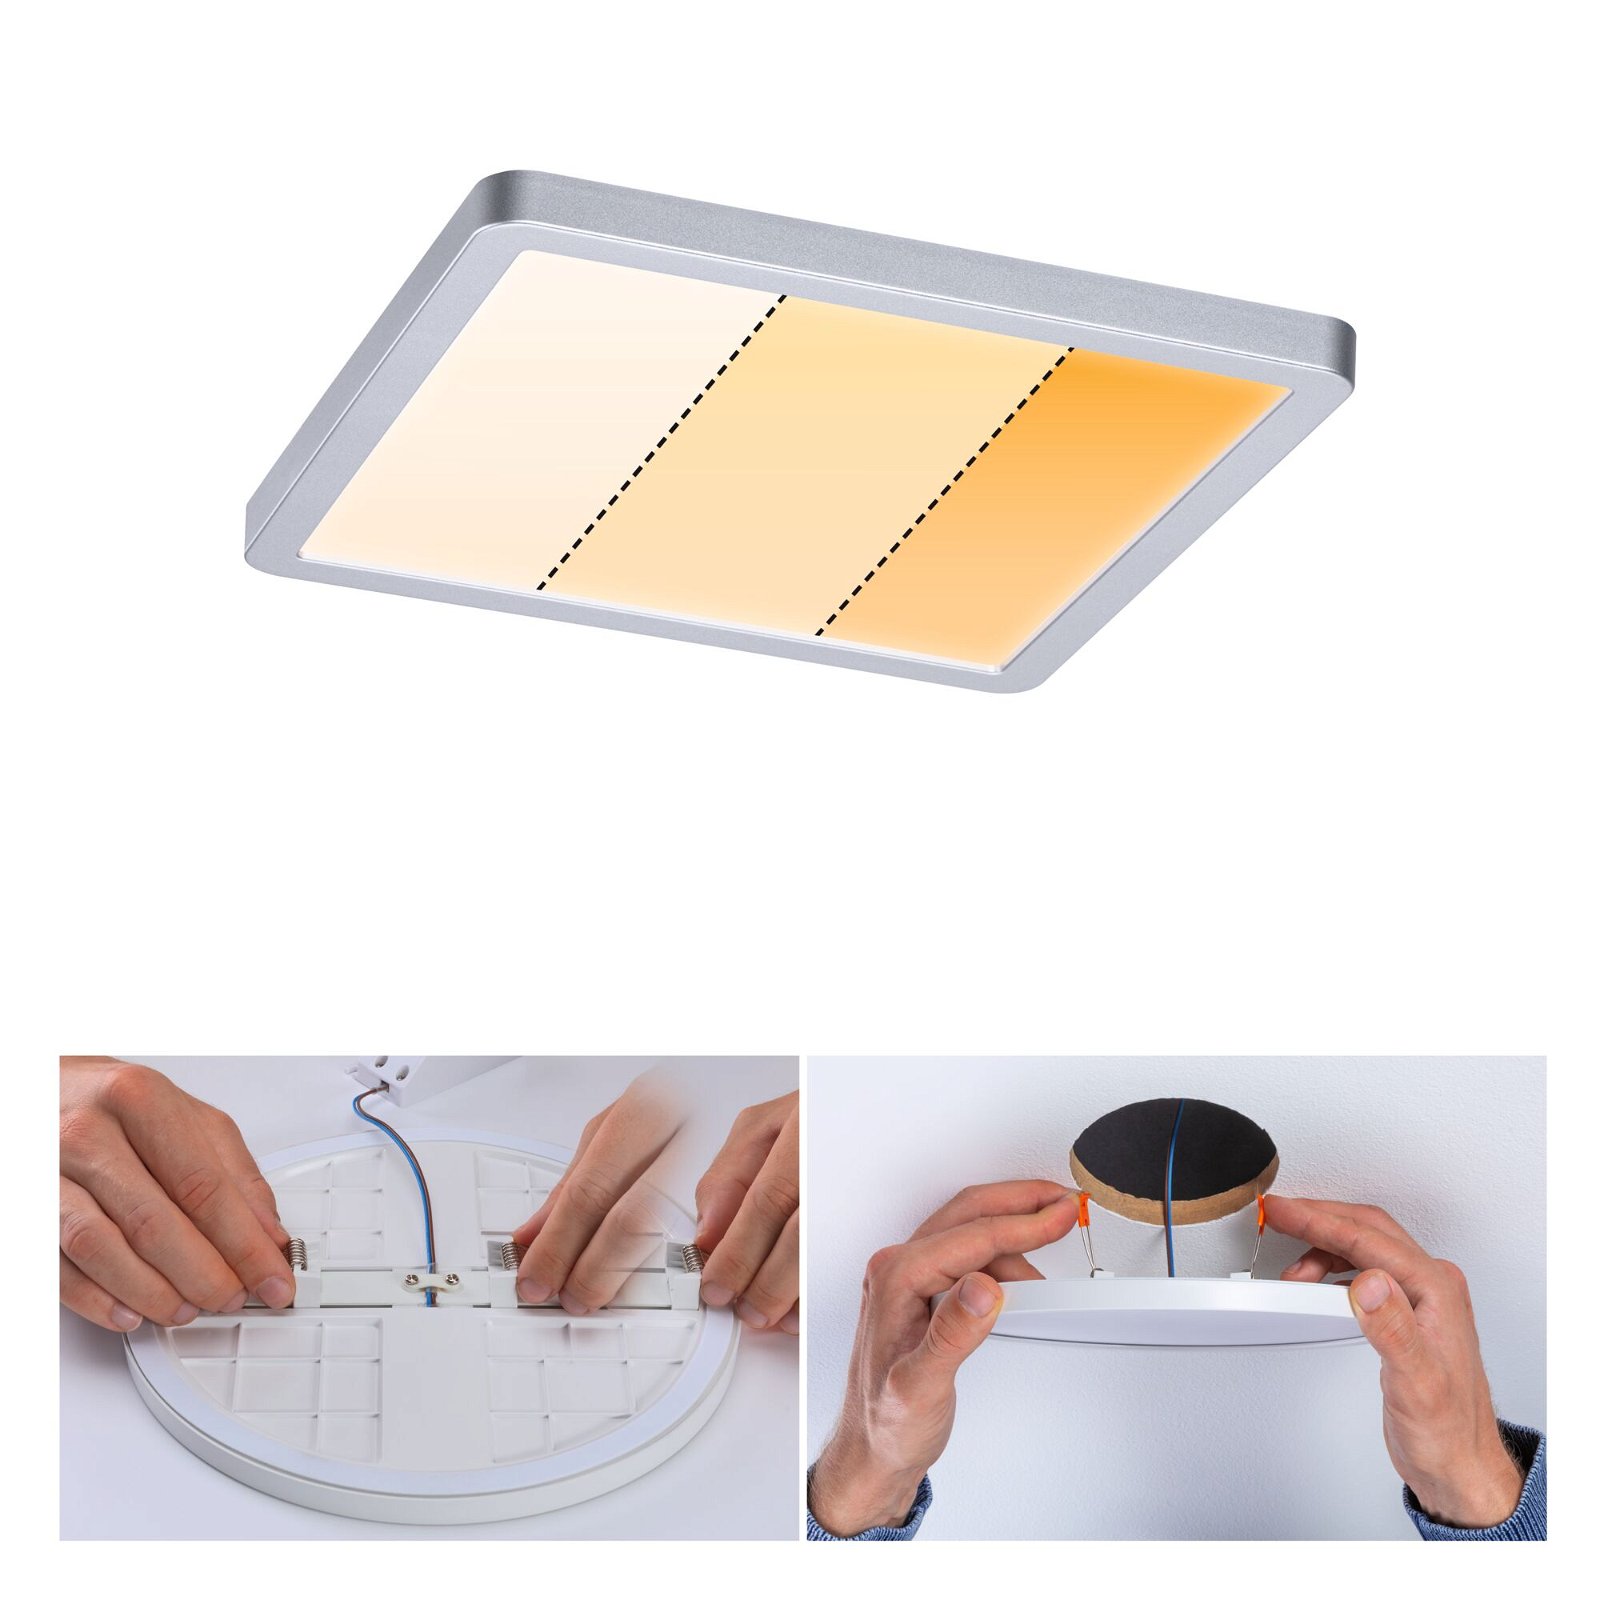 VariFit LED Recessed panel Dim to Warm Areo IP44 square 175x175mm 13W 1200lm 3 Step Dim to warm Chrome matt dimmable